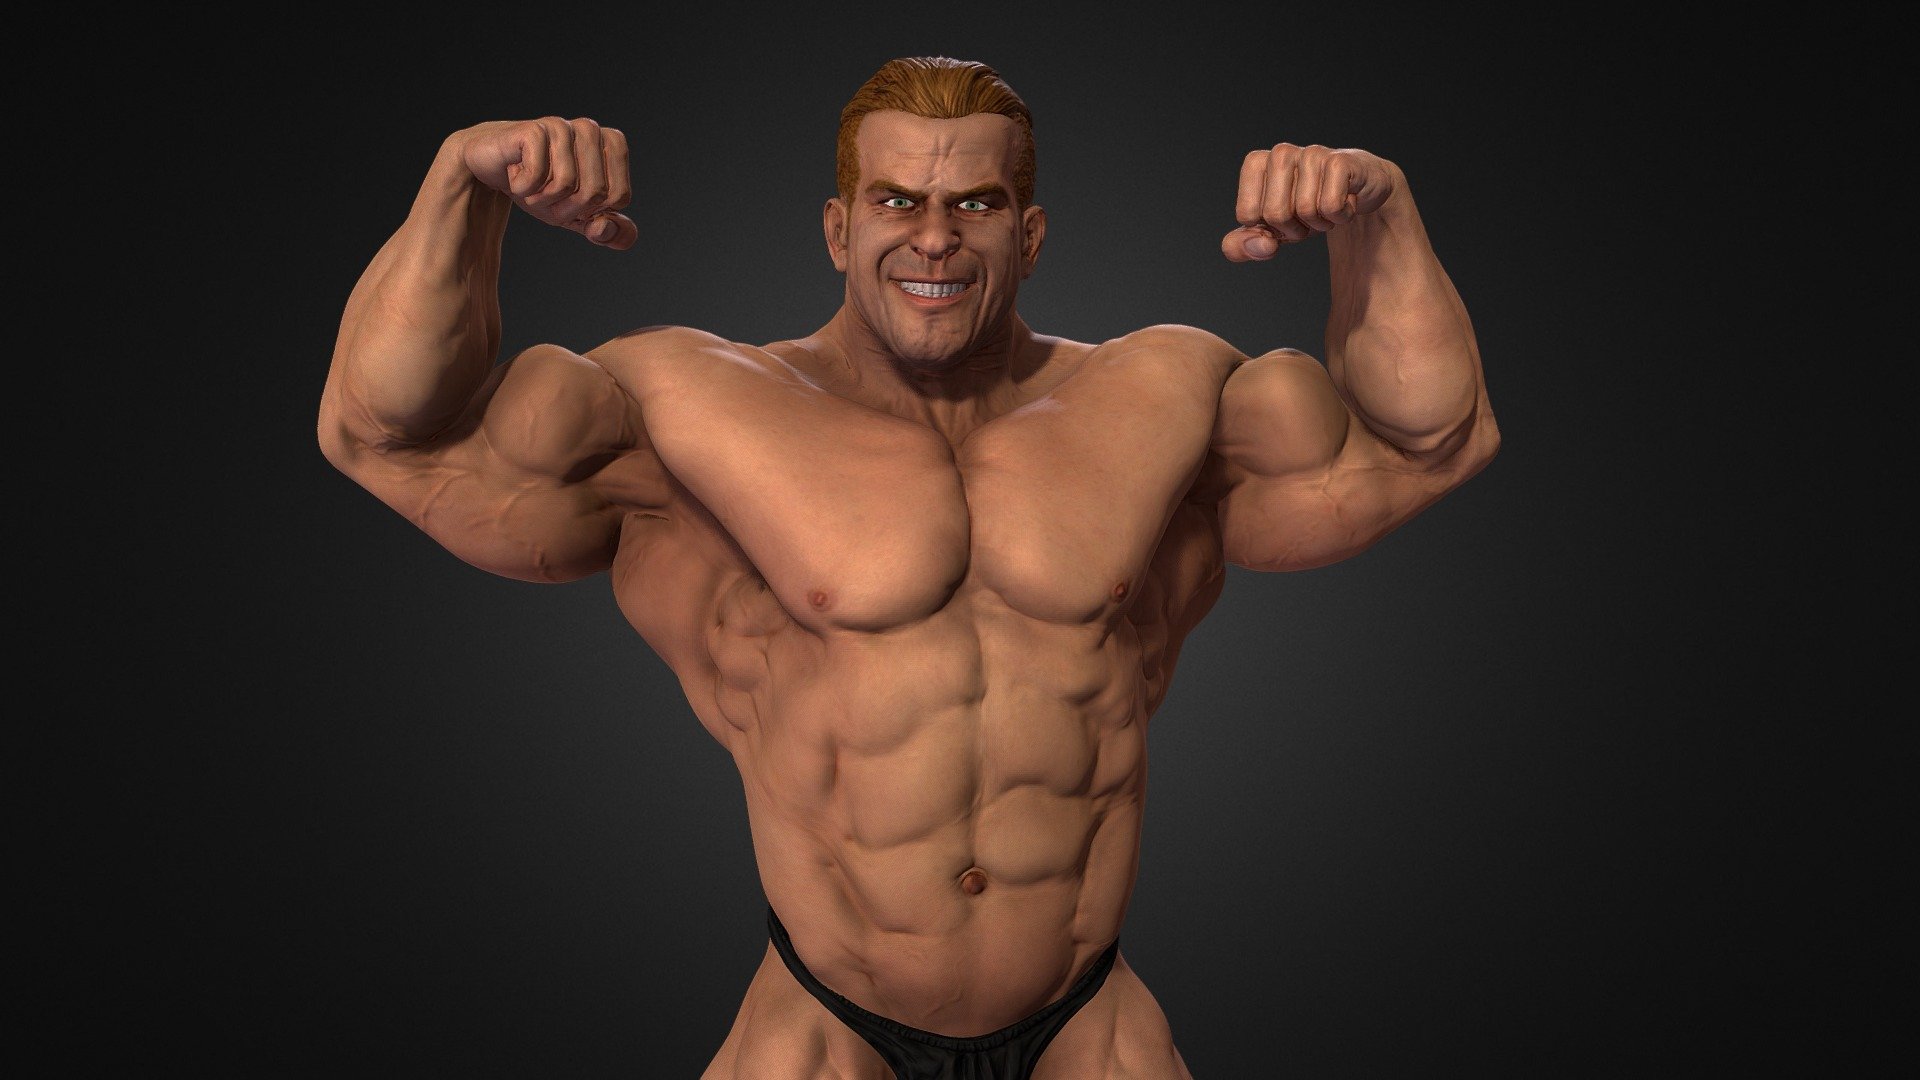 4X Mr. Olympia Jay Cutler - 3D model by BergmannIIpruss.